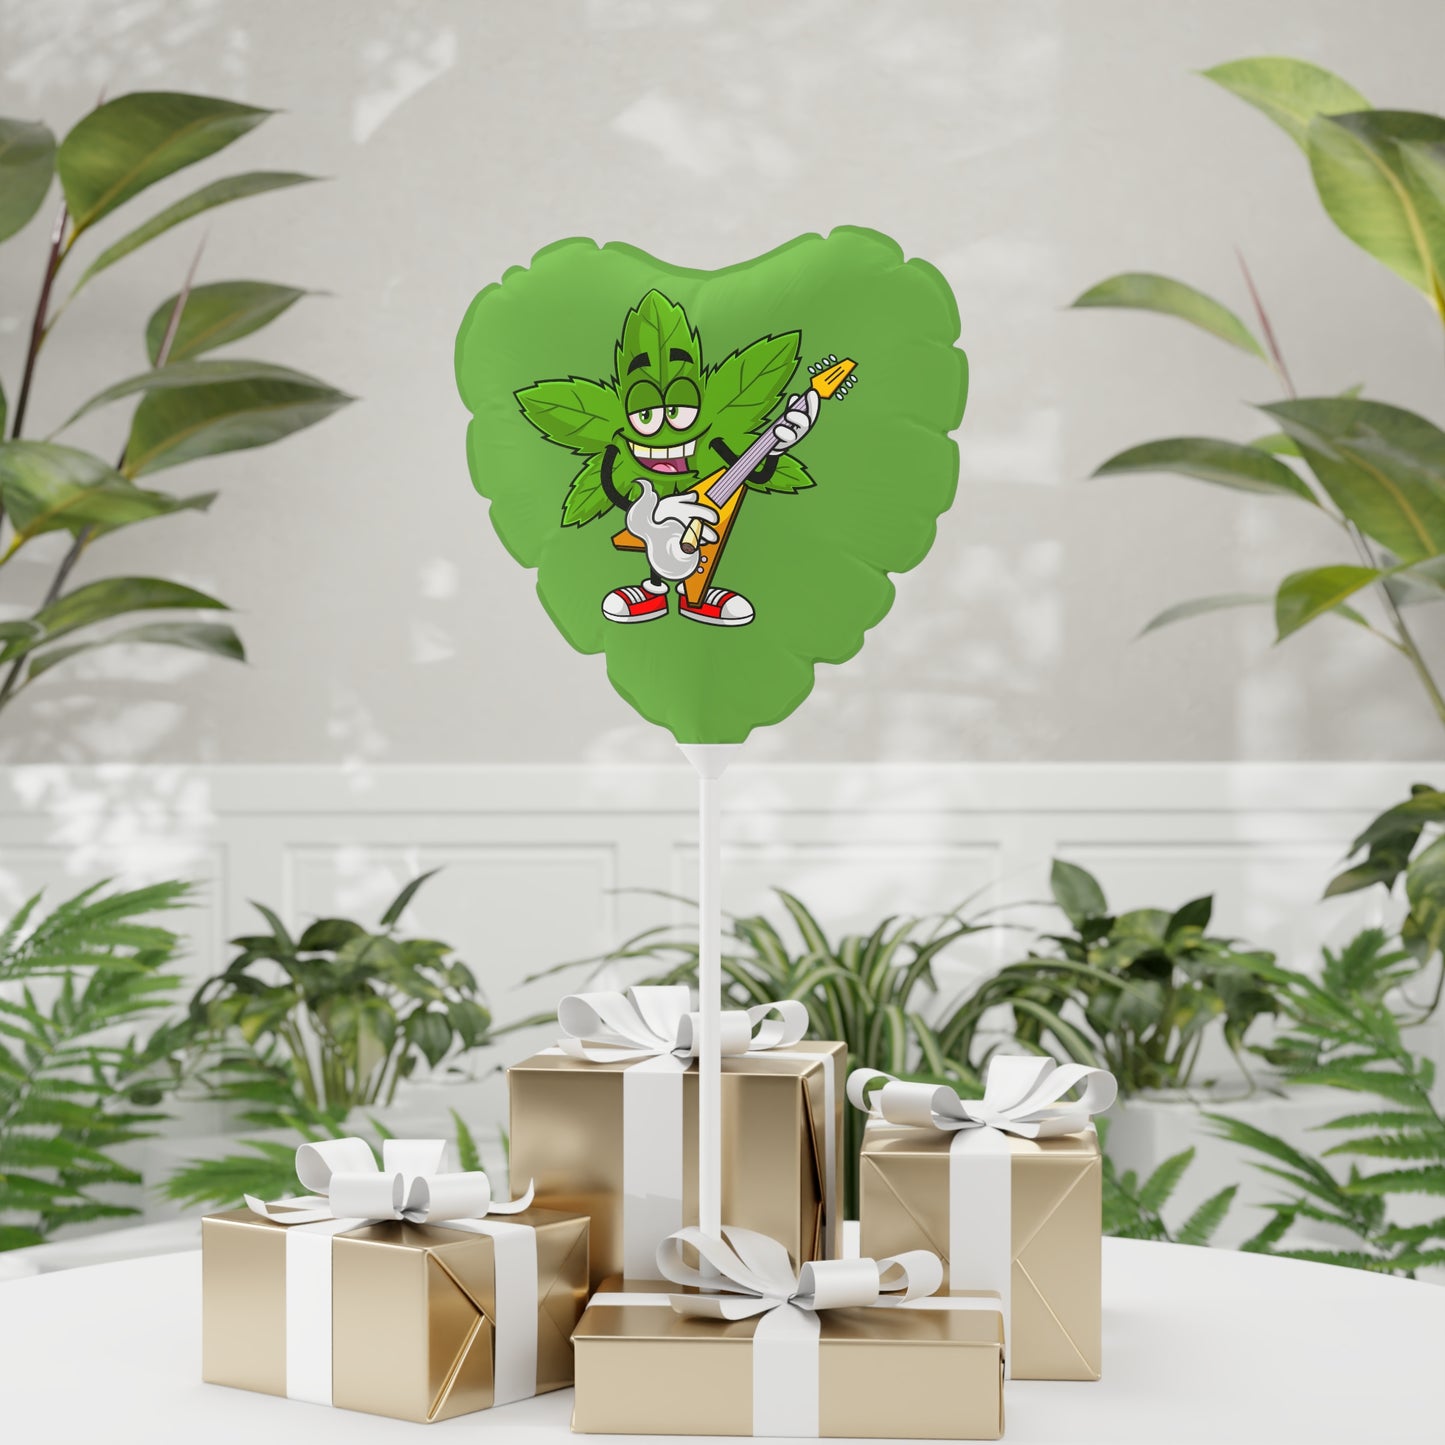 Marijuana Reggae Pot Leaf Man Smoking A Joint With Red Sneakers Style 2, Green Balloon (Round and Heart-shaped), 11"